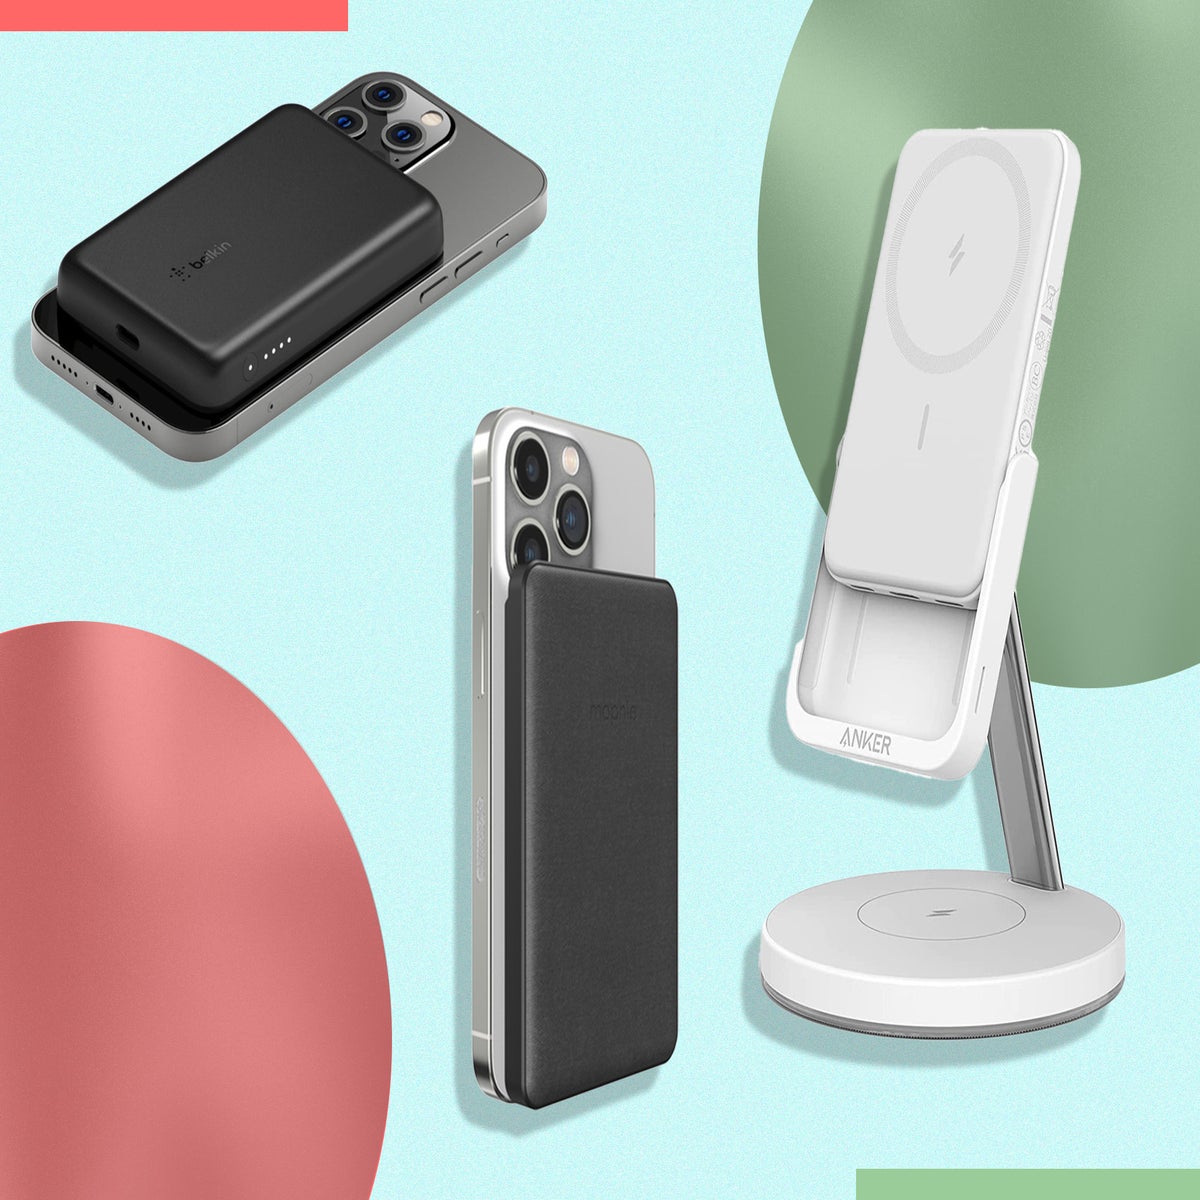 Best portable chargers 2022: Charge your iPhone or Android on the go